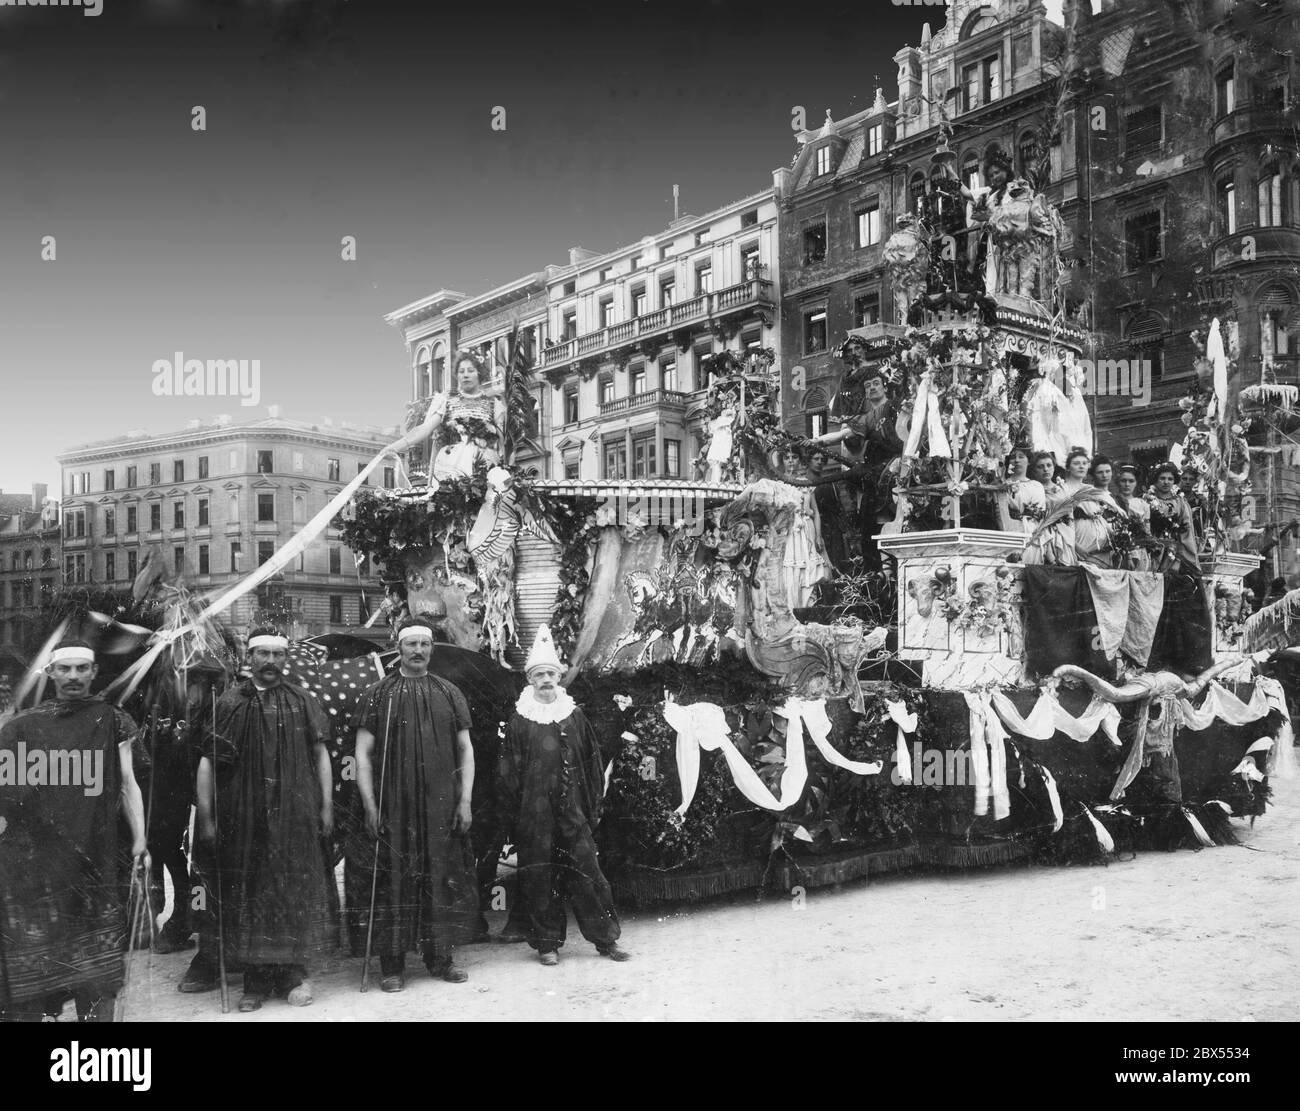 Photo of a carriage of the carnival procession from 1897, showing a parade float decorated with antique motifs depicting the 'Olympic champions of the past' with mythical and divine figures. Stock Photo